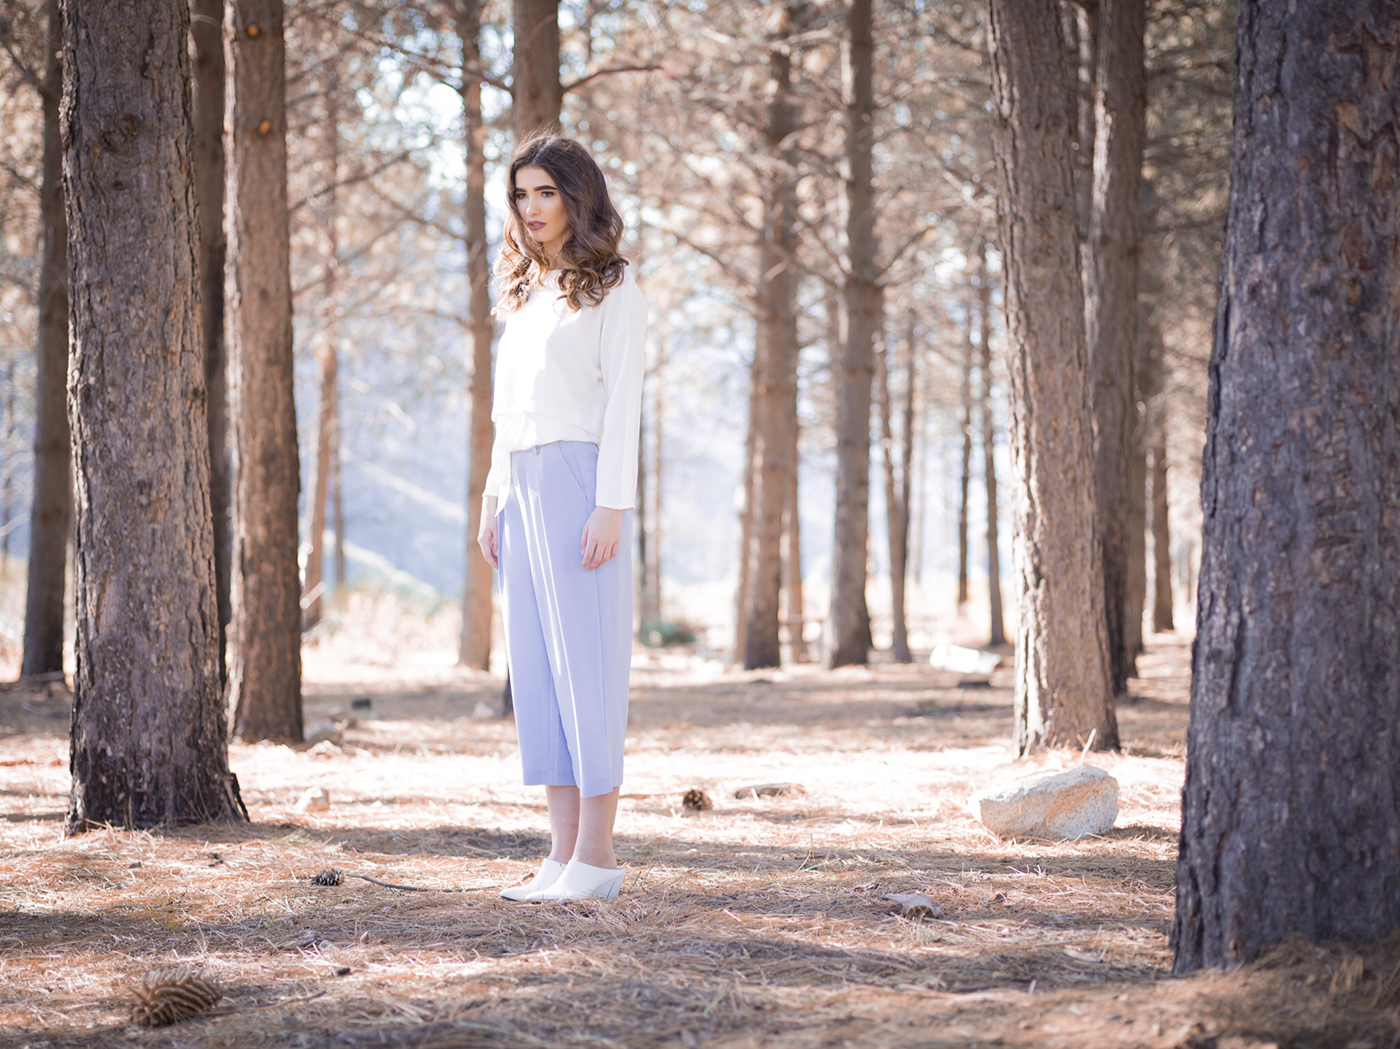 Los Angeles Angeles Crest fashion editorial model trees woods